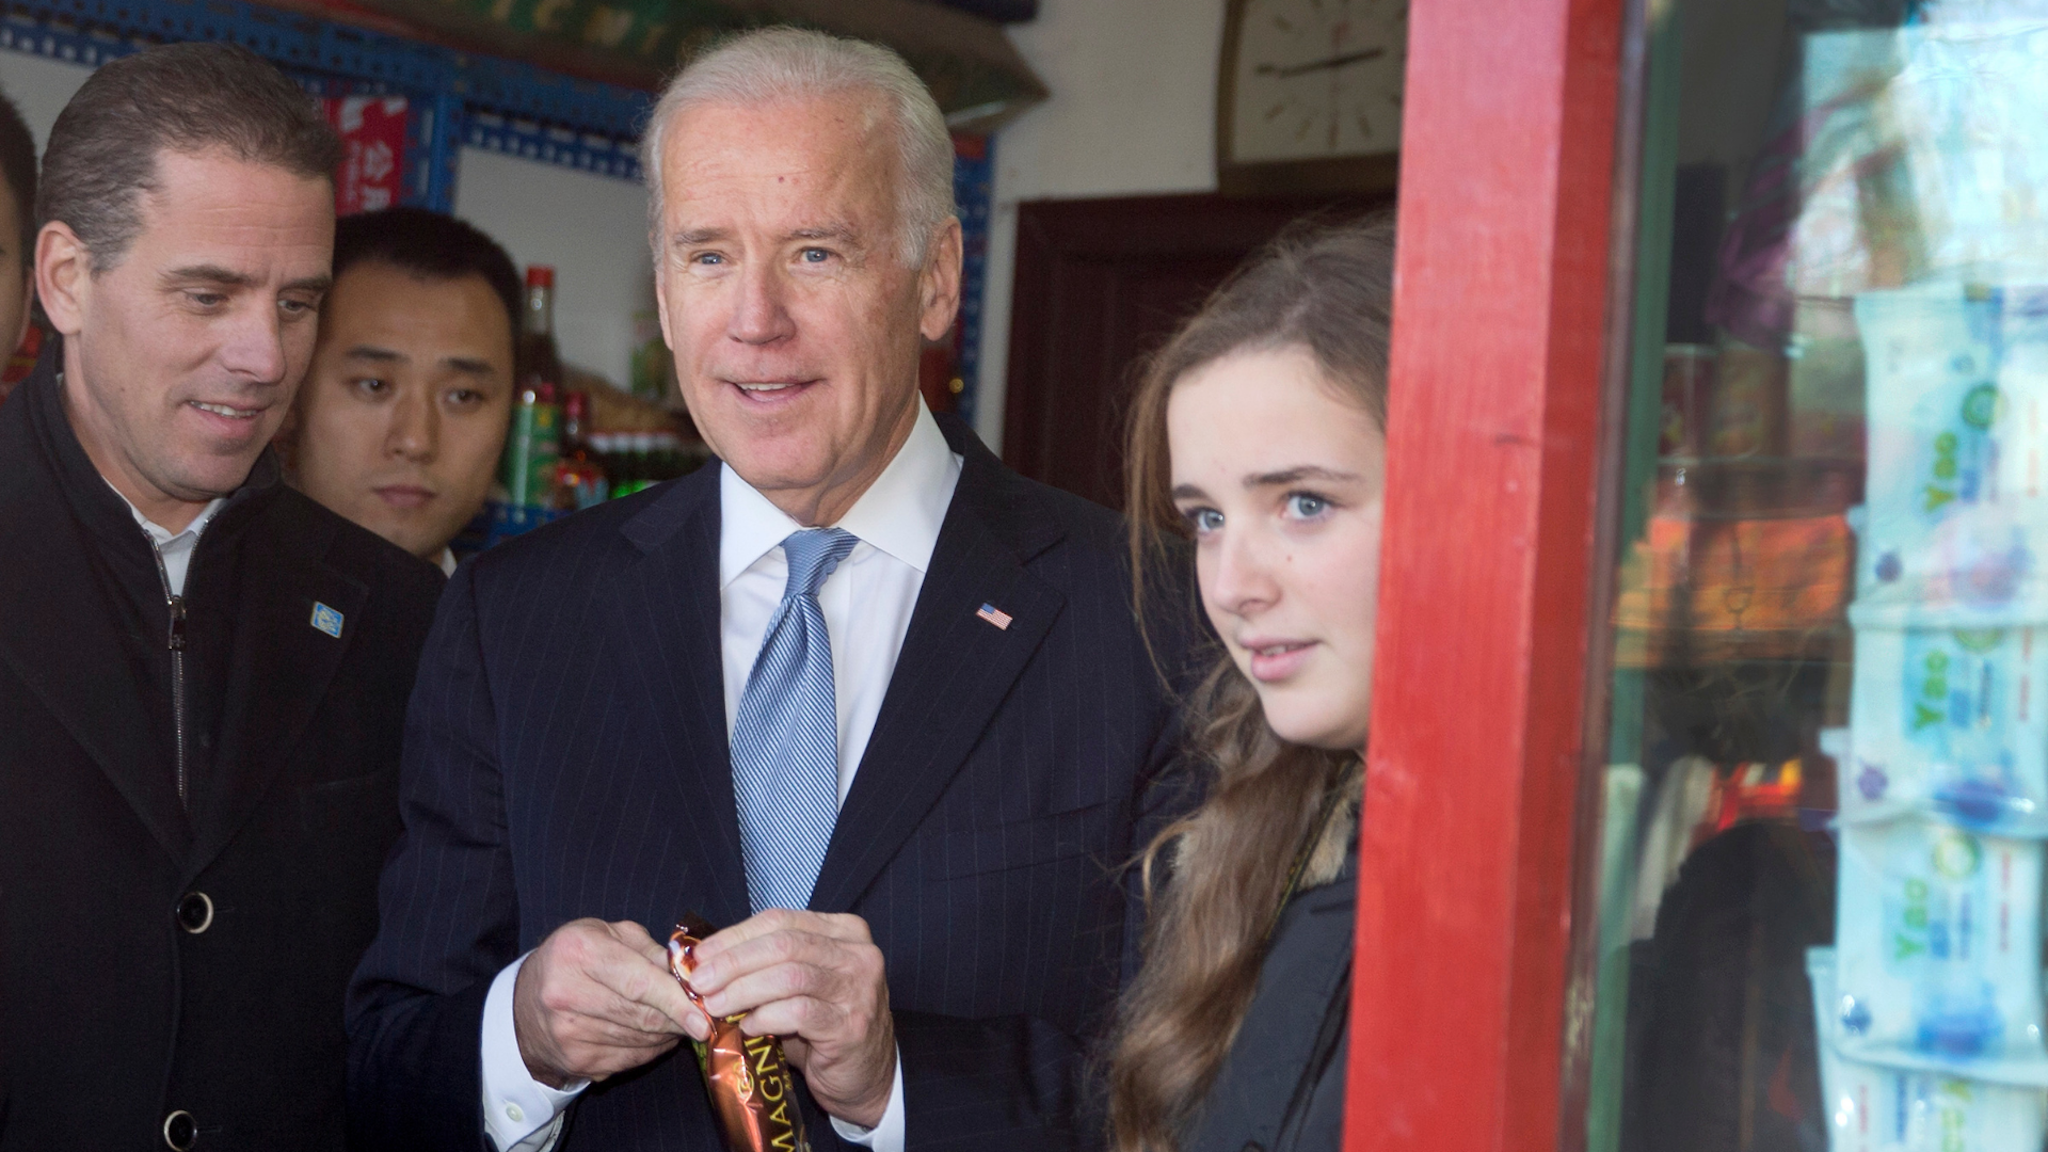 BEIJING, CHINA - DECEMBER 05: U.S. Vice President Joe Biden, center, buys an ice-cream at a shop as he tours a Hutong alley with his granddaughter Finnegan Biden, right, and son Hunter Biden, left on December 5, 2013 in Beijing, China. U.S Vice President Joe Biden is on an official visit to China from December 4 to 5.